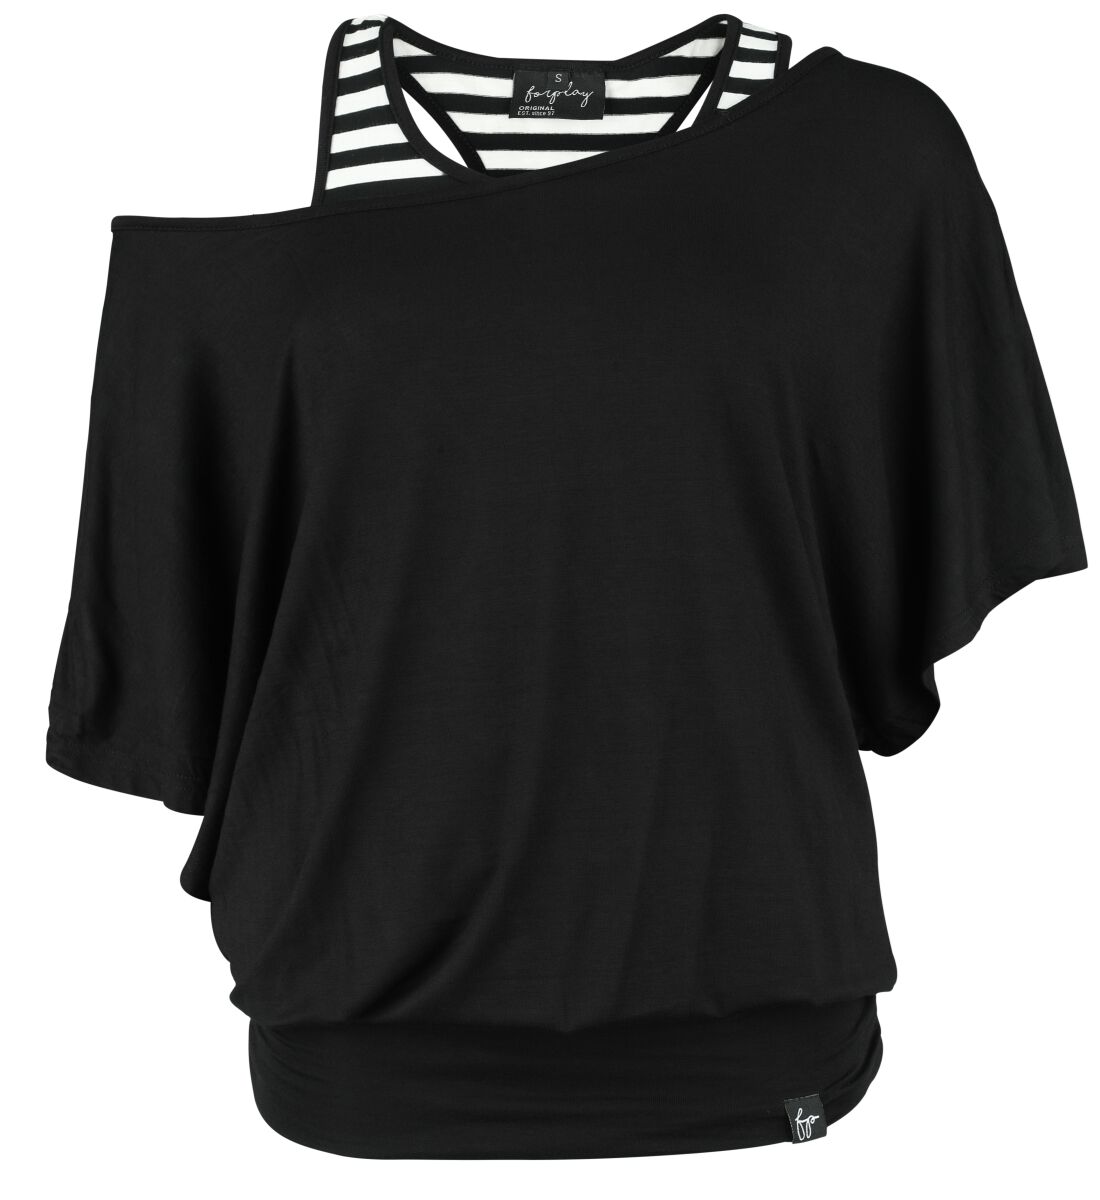 Image of T-Shirt di Forplay - Jean - S a XXL - Donna - nero/bianco